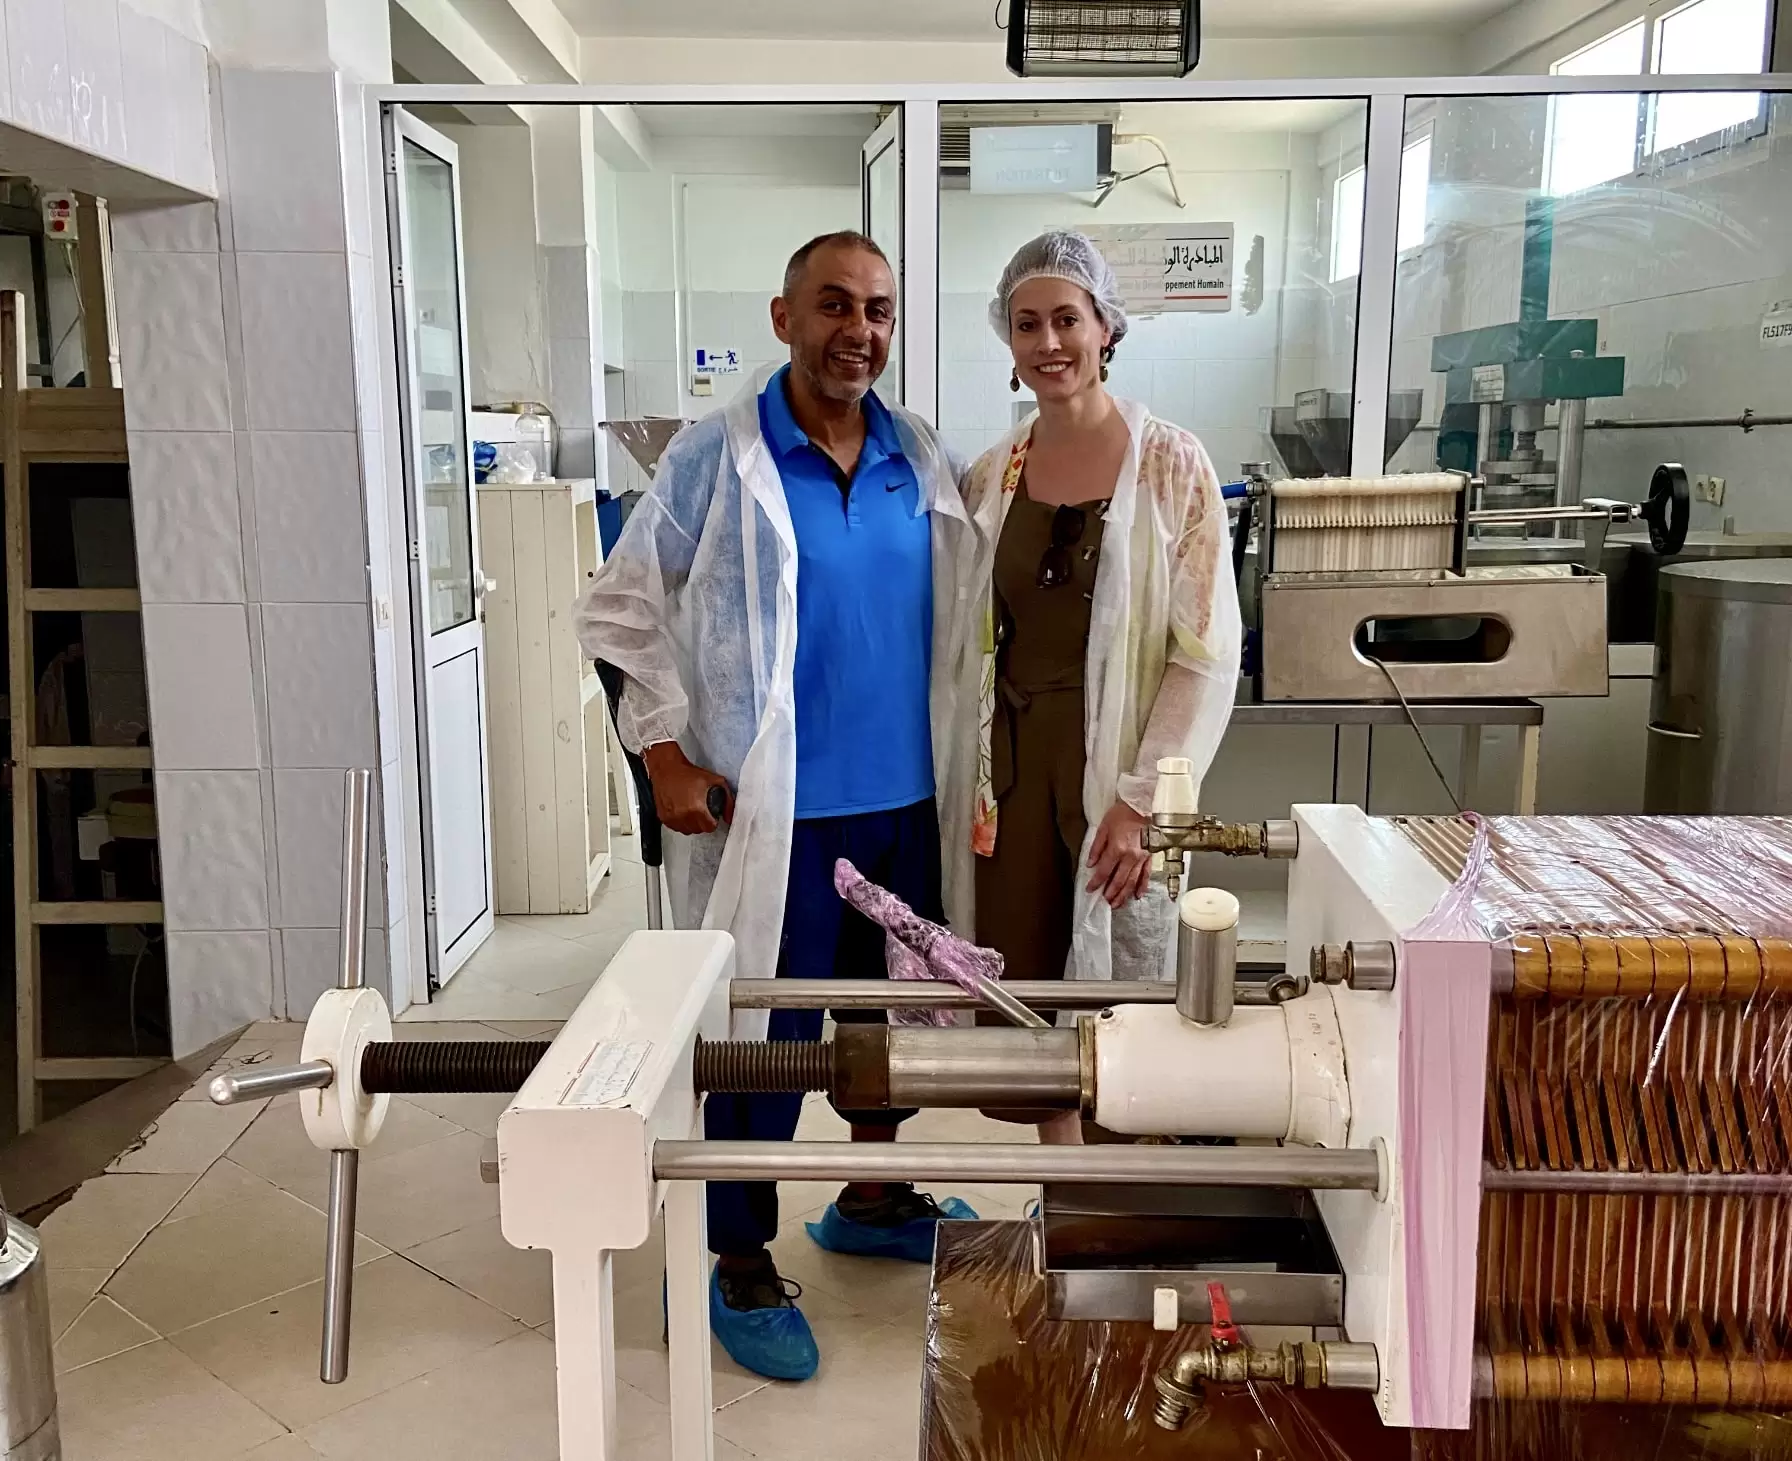 Impressions from the argan oil mill